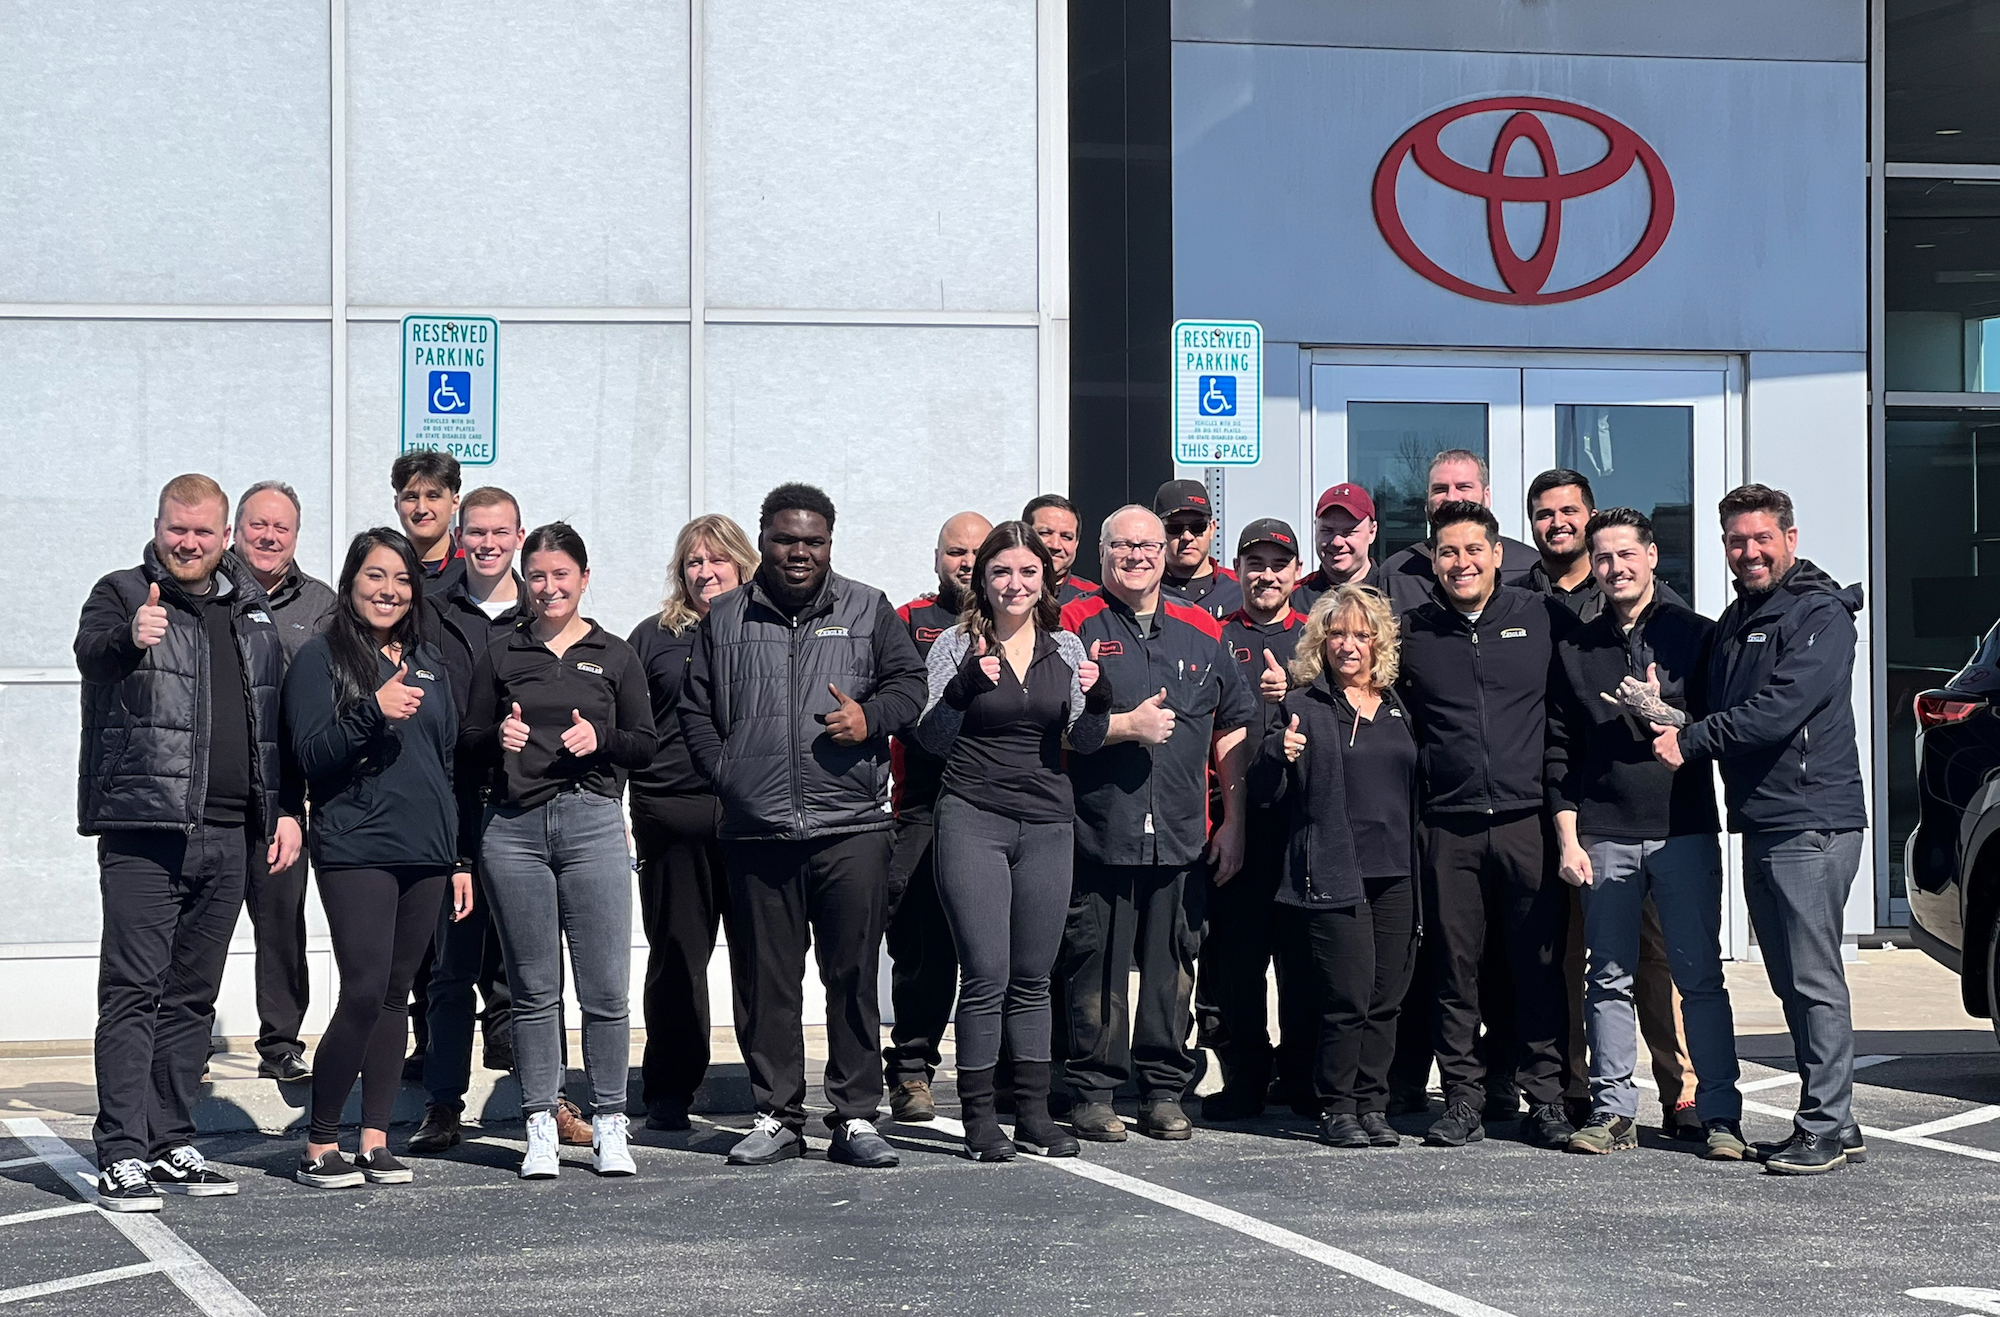 Team members pose for a picture in front of the award-winning Toyota dealer in Racine